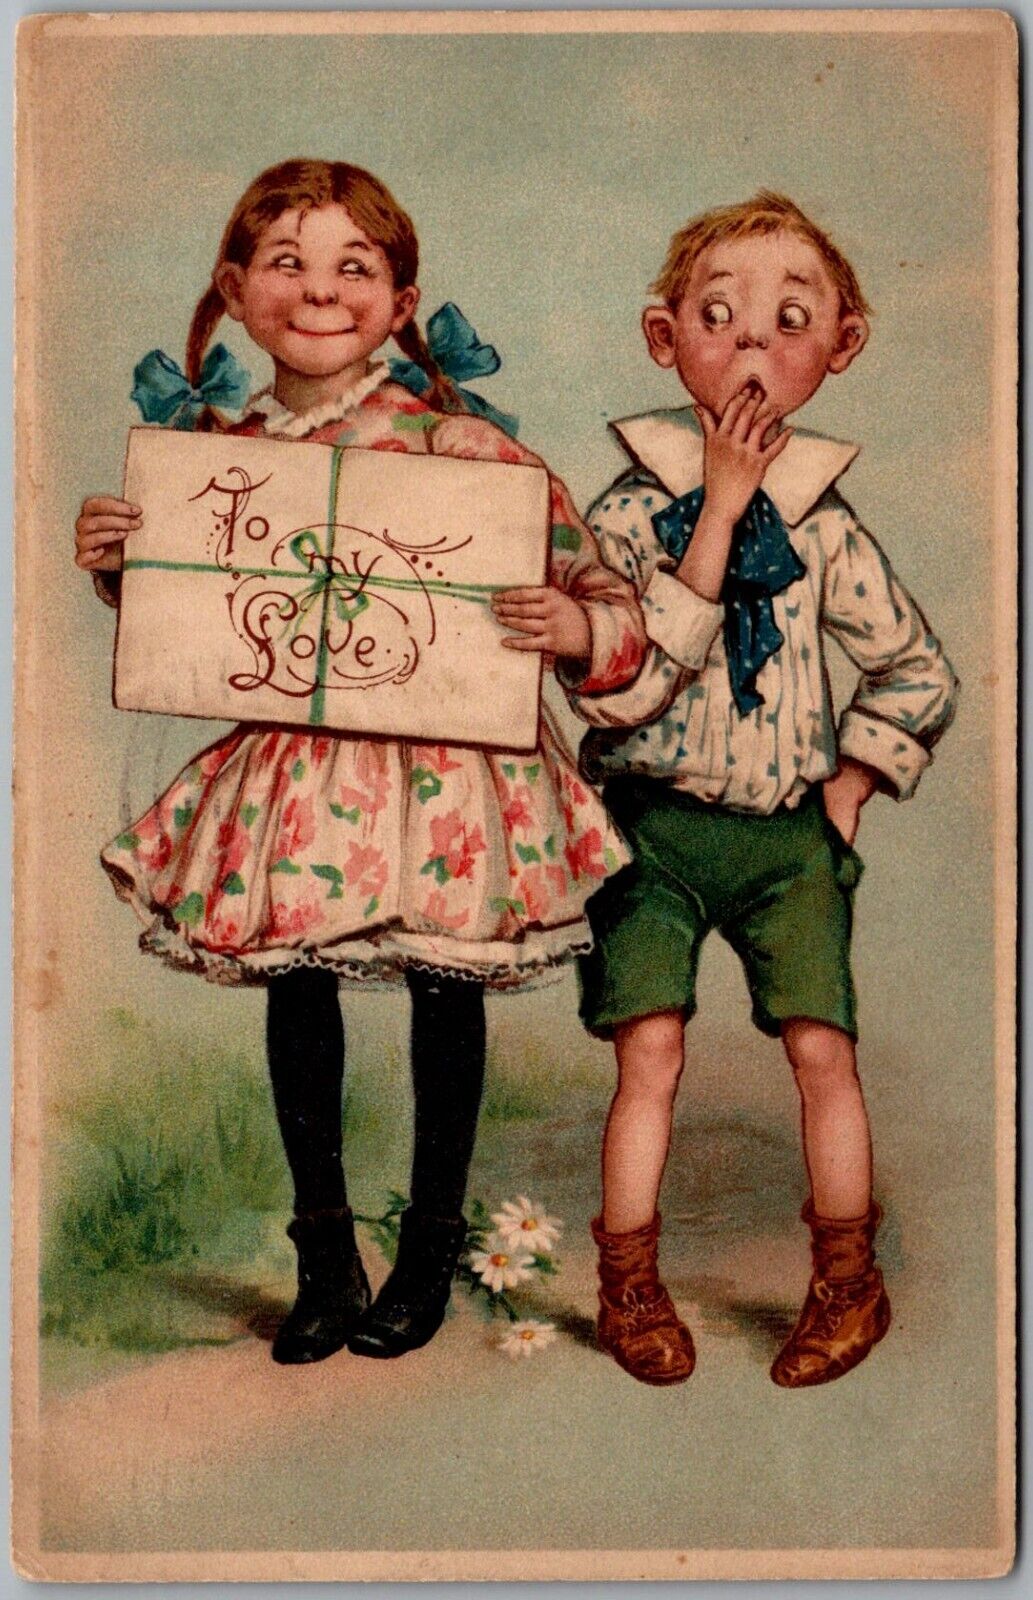 Postcard To My Love; Francis Brundage; Raphael Tuck and Sons No. 109 Ep